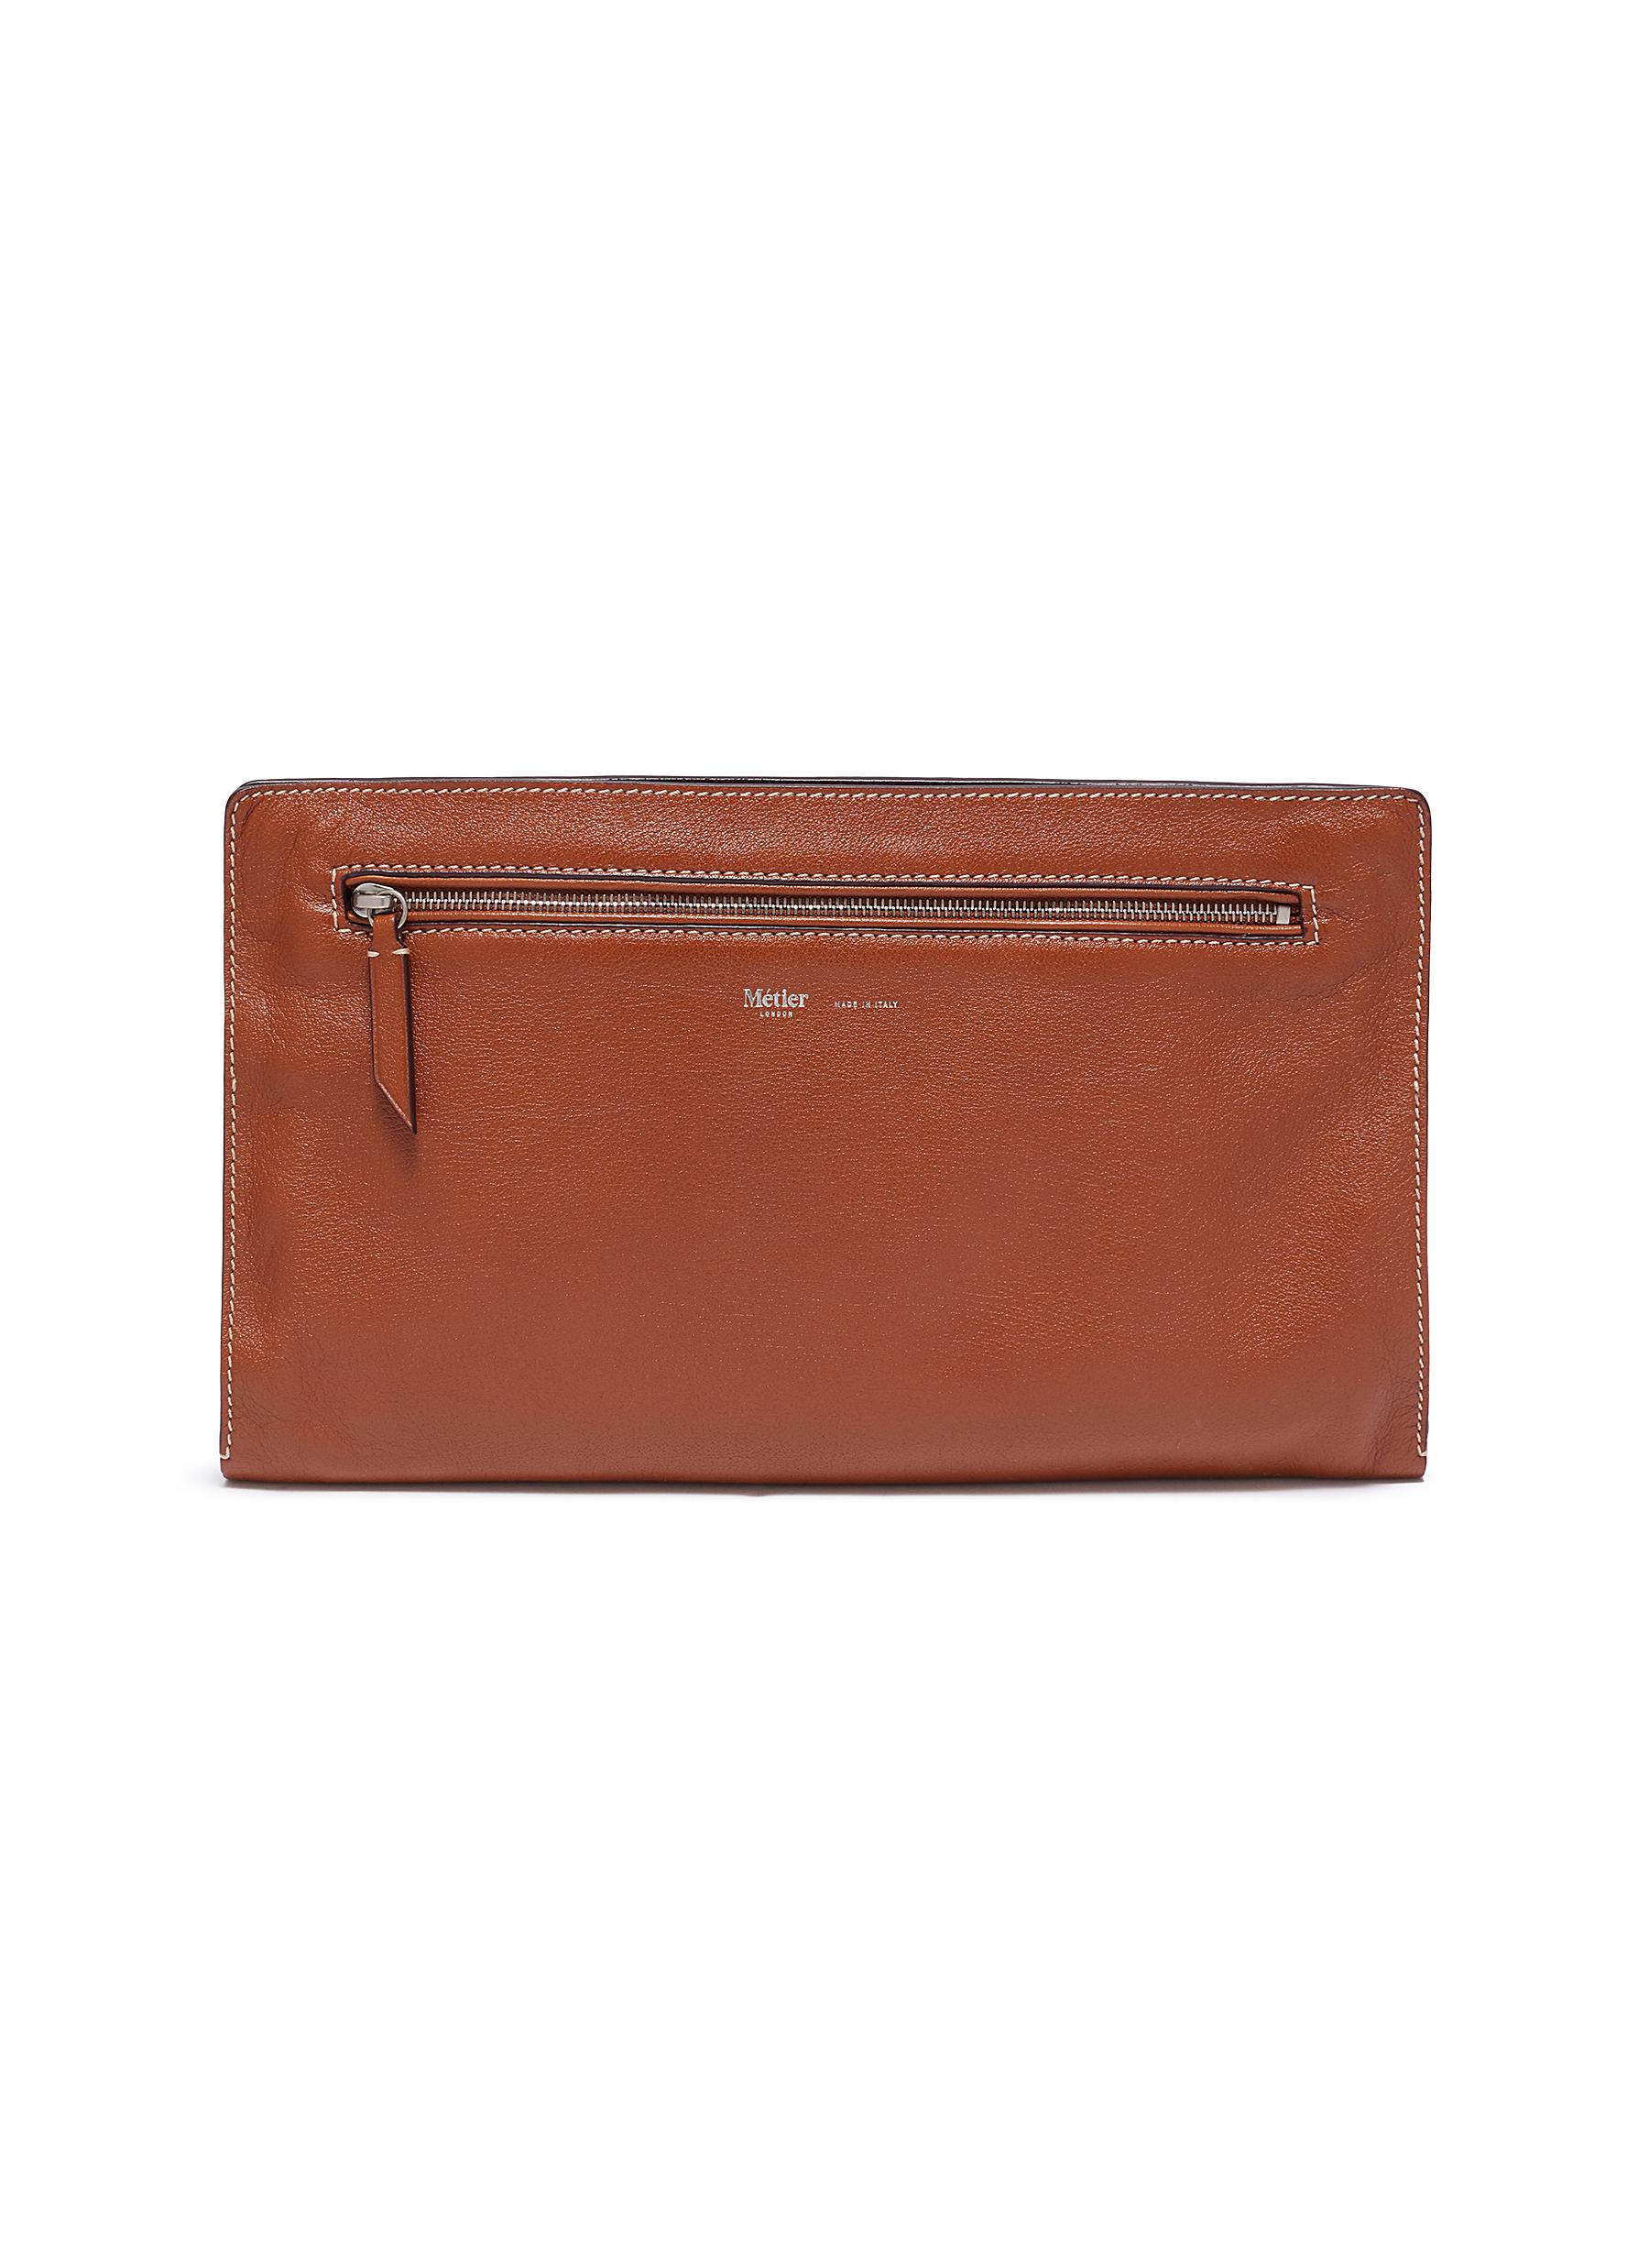 ’Runaway I’ buffalo leather envelope pouch